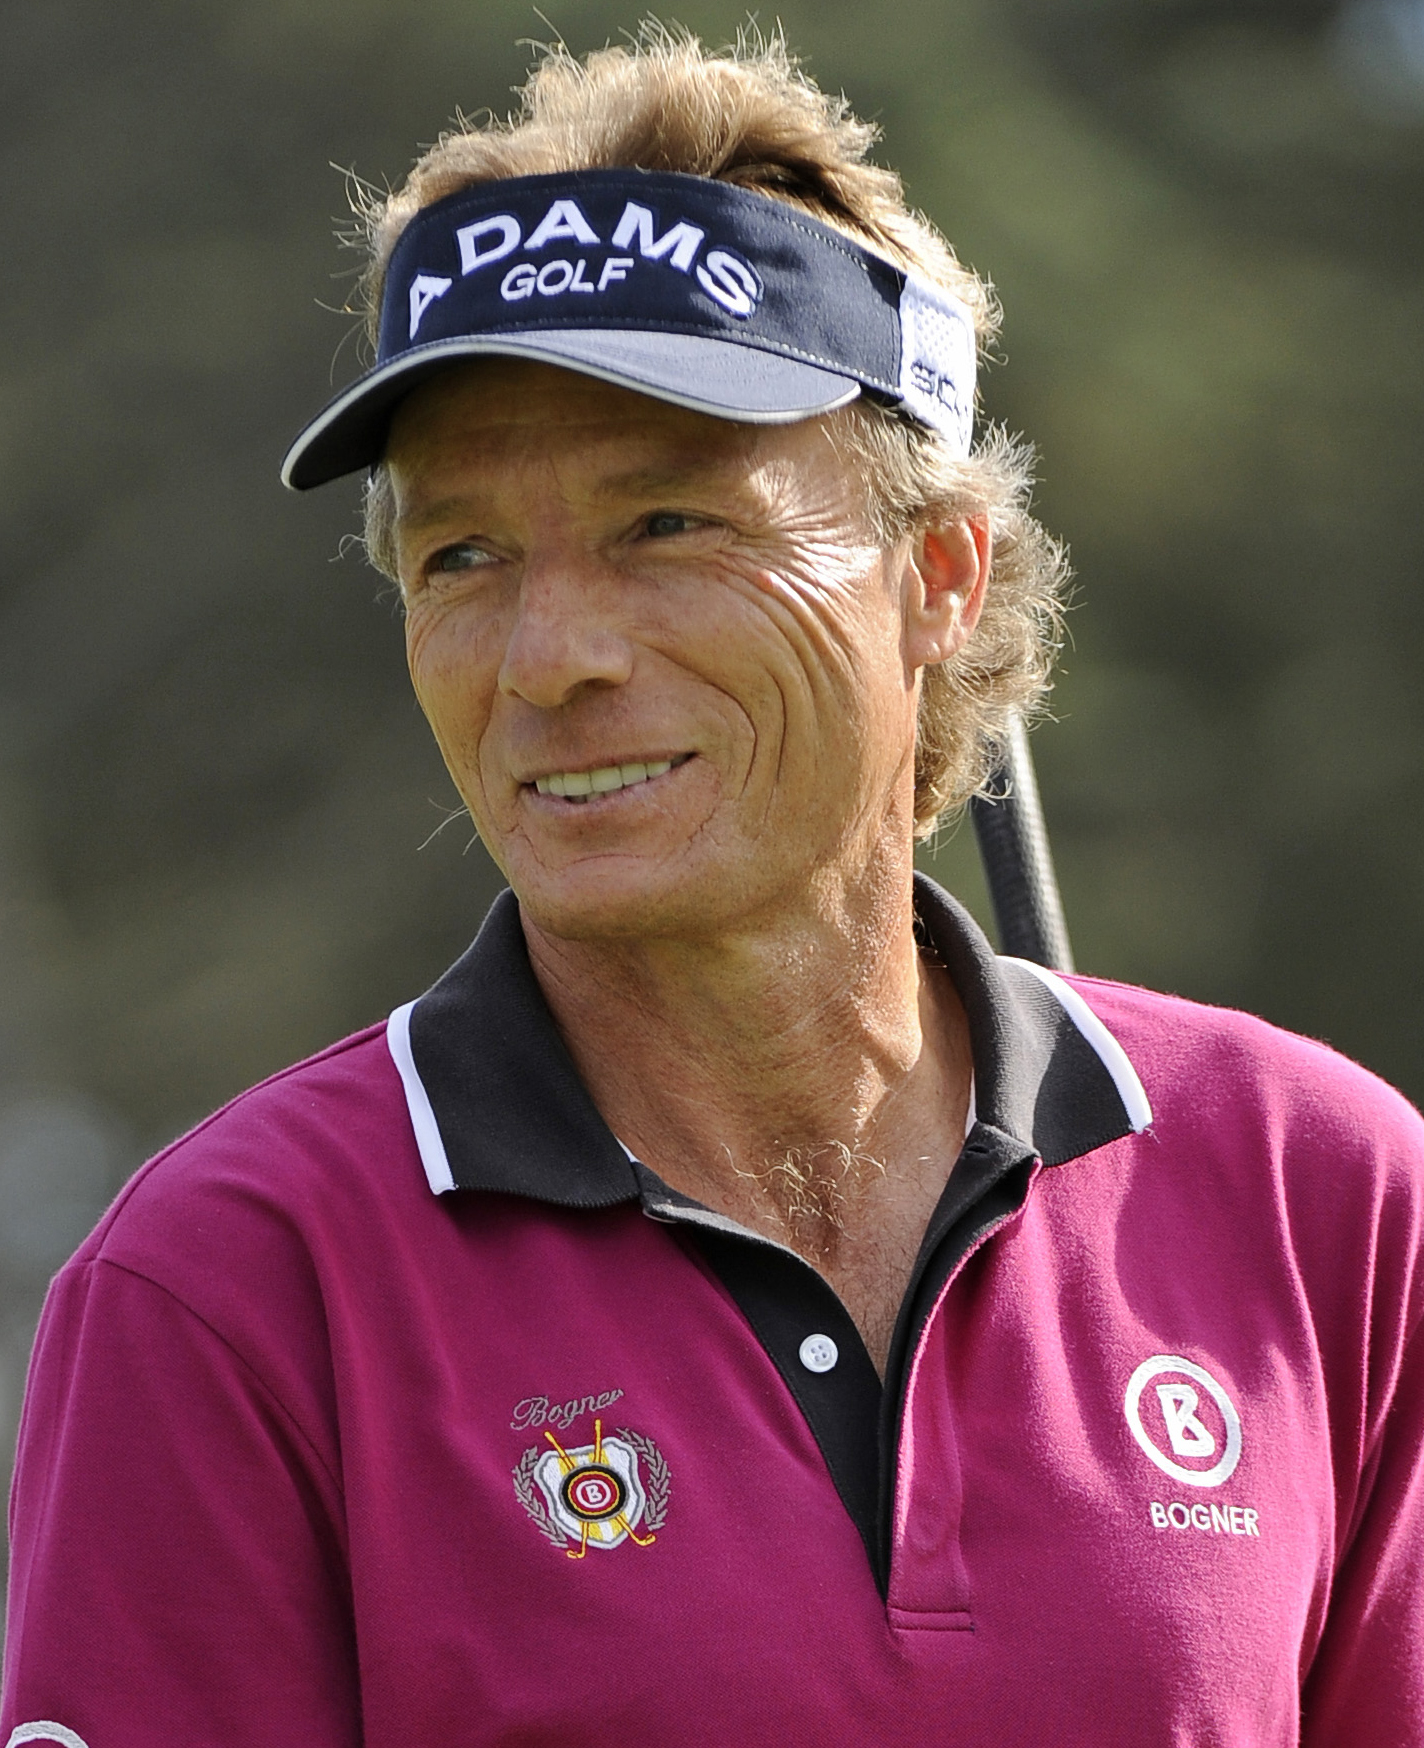 A two-time Masters winner and a German citizen, Langer most likely would know better than to try and vote in our presidential election